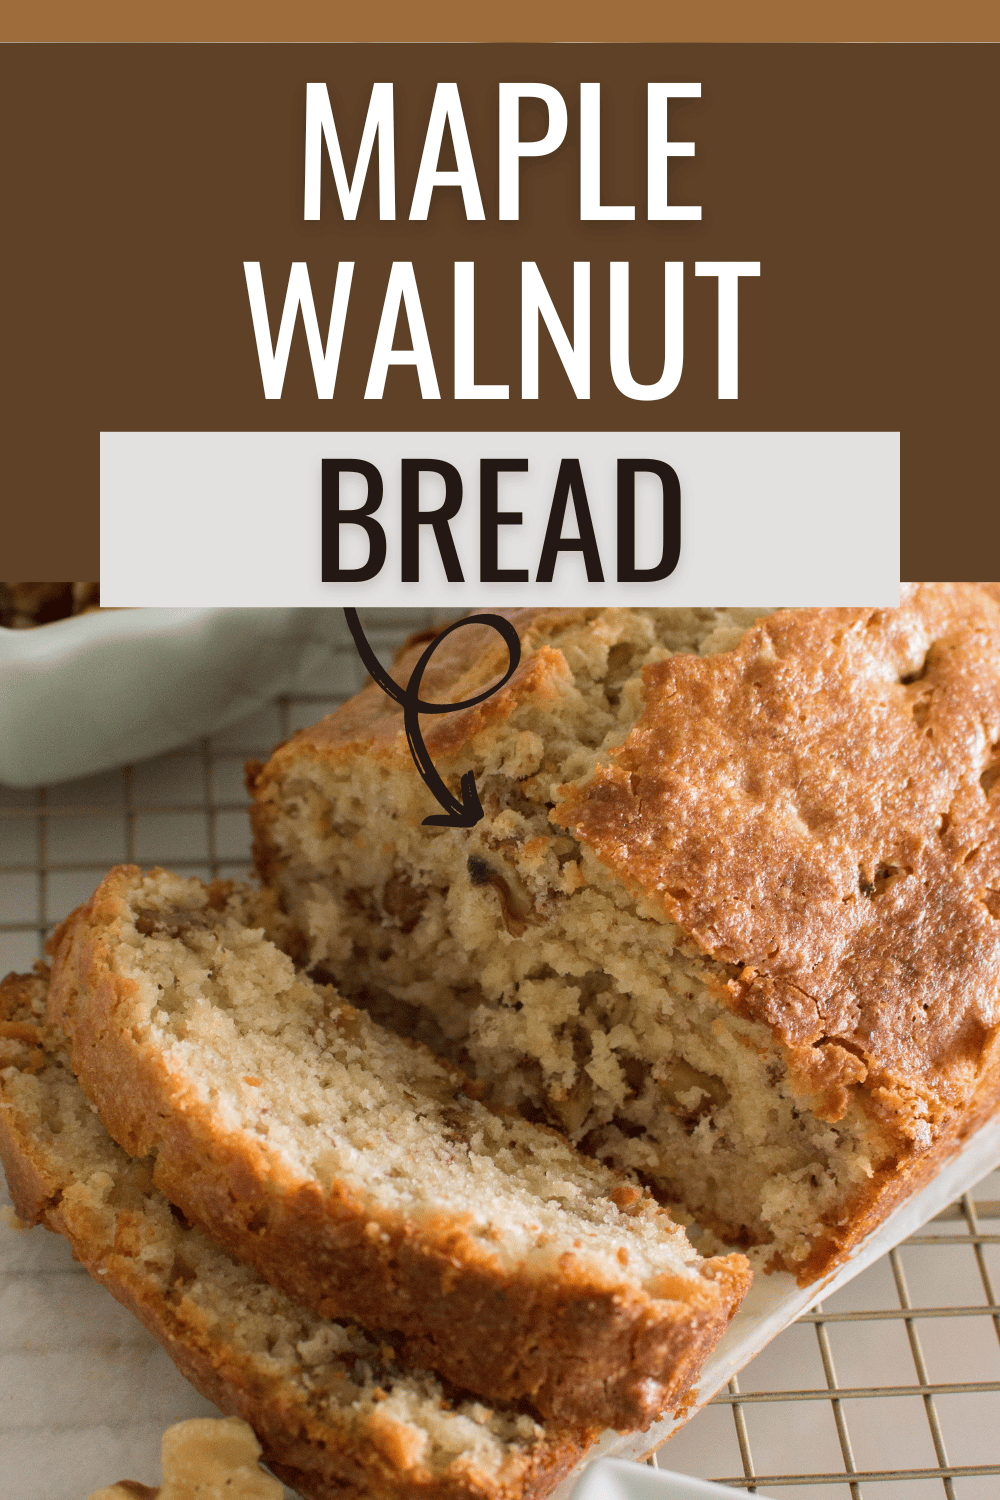 This Maple Walnut Bread is a delicious and easy-to-make quick bread. It’s perfect for breakfast or a snack, and makes a wonderful gift! #maplewalnutbread #breakfast #snack #fallfood #recipe via @wondermomwannab